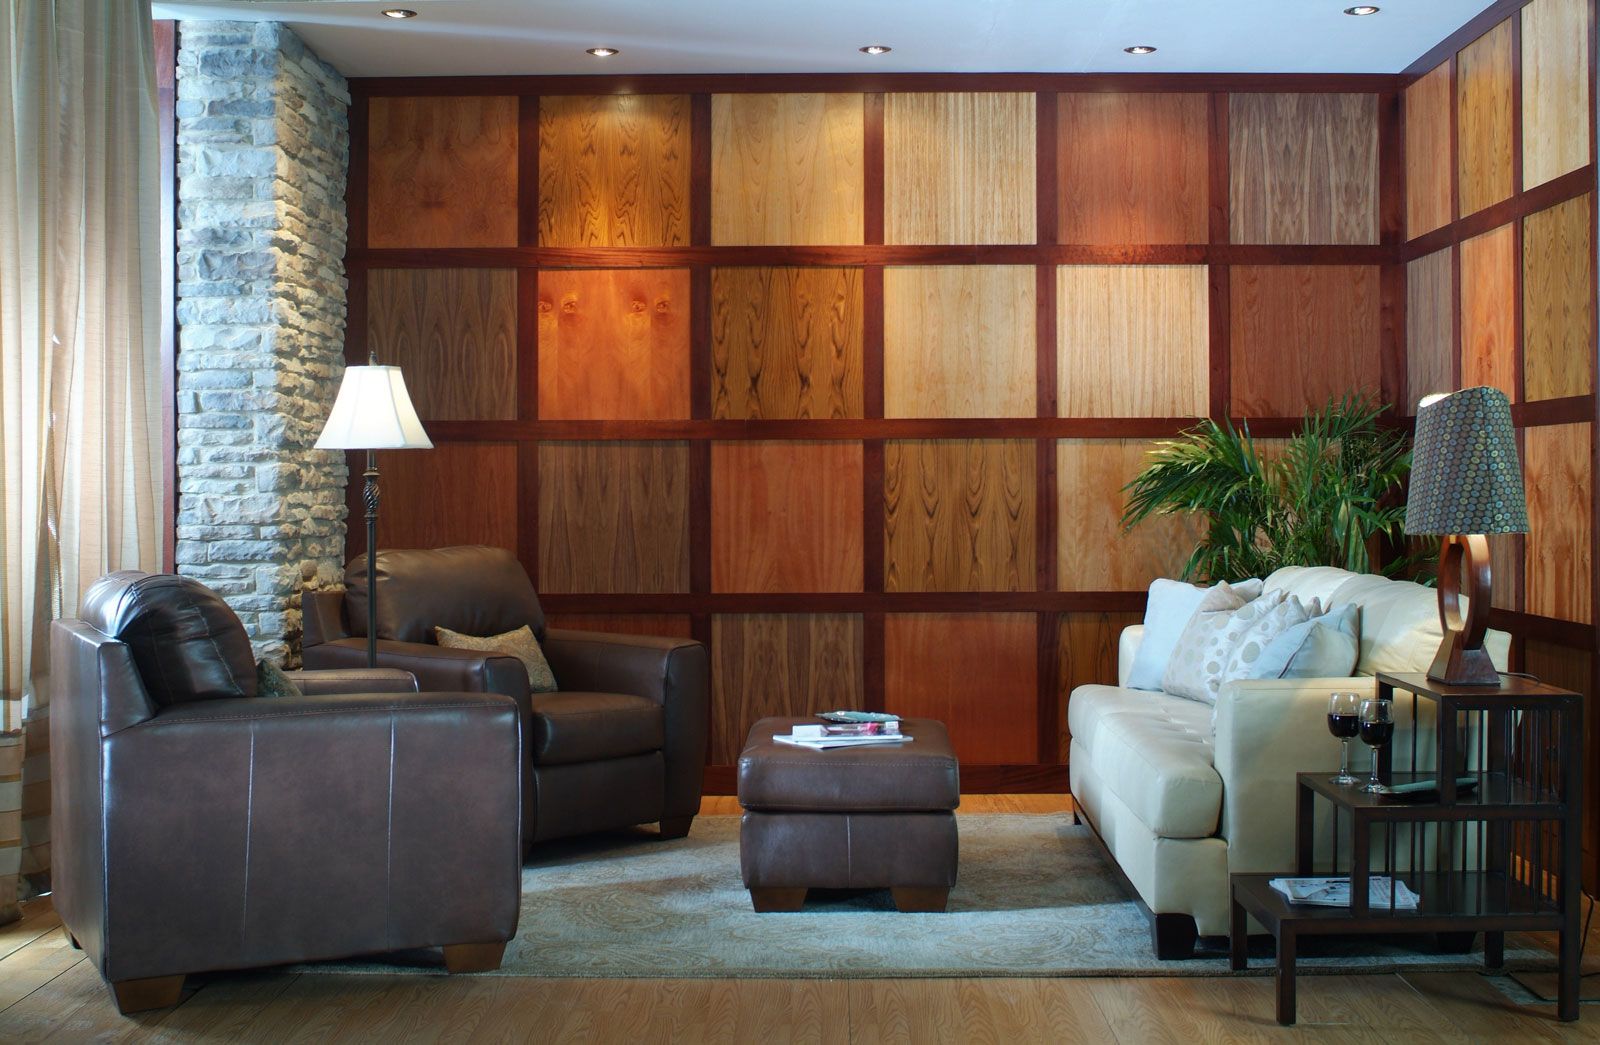 Rosewood Color - Pick an Unusual Wood Color for Your Apartment